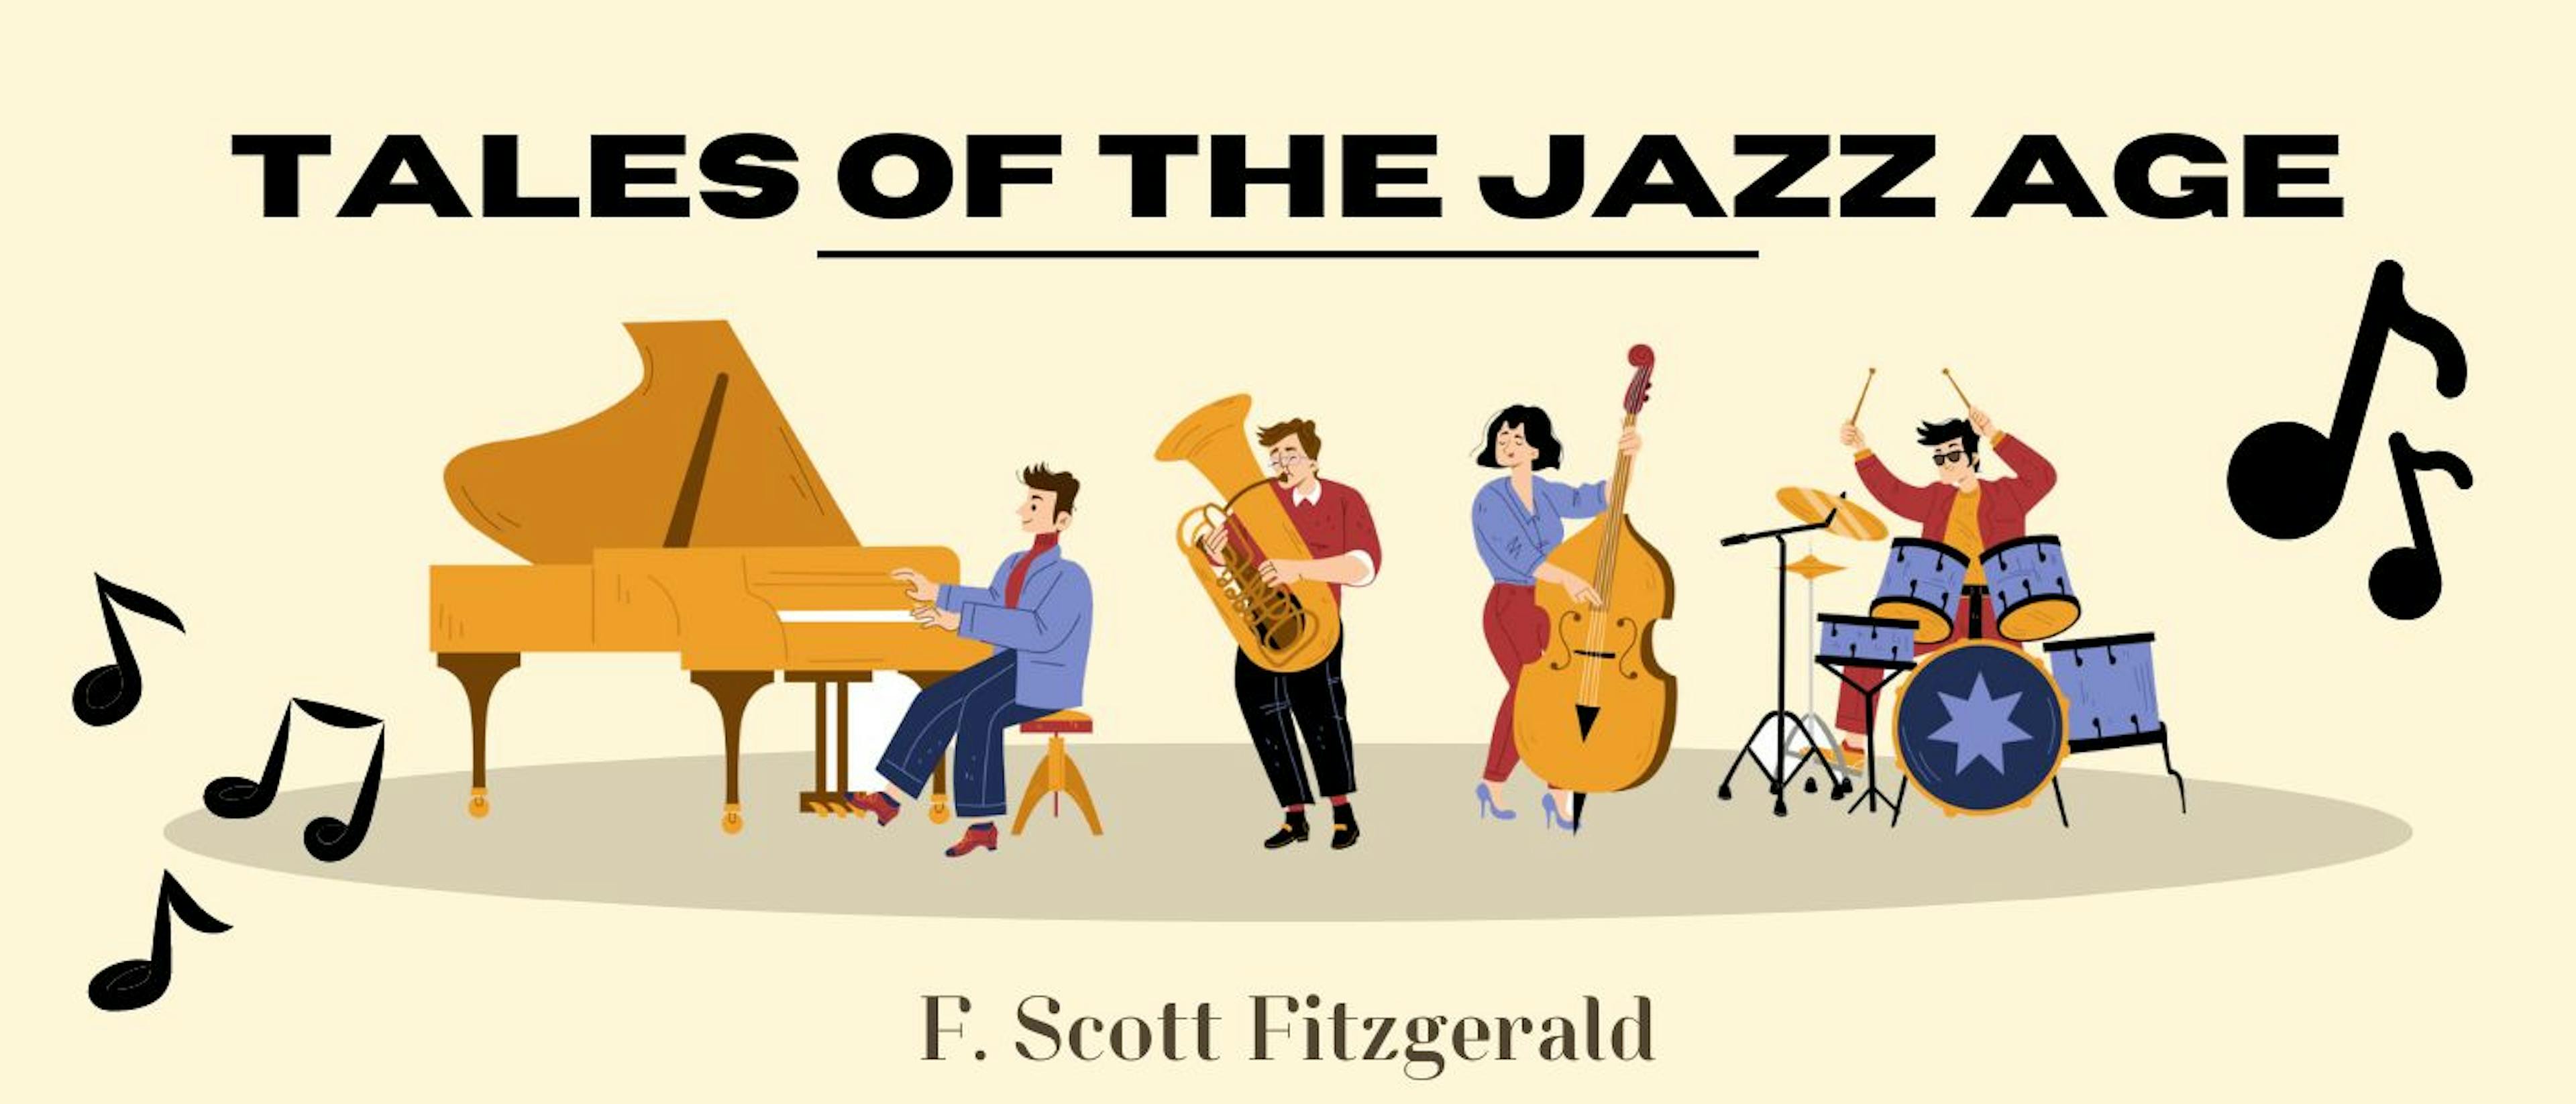 featured image - Tales of the Jazz Age by F. Scott Fitzgerald - Table of Links